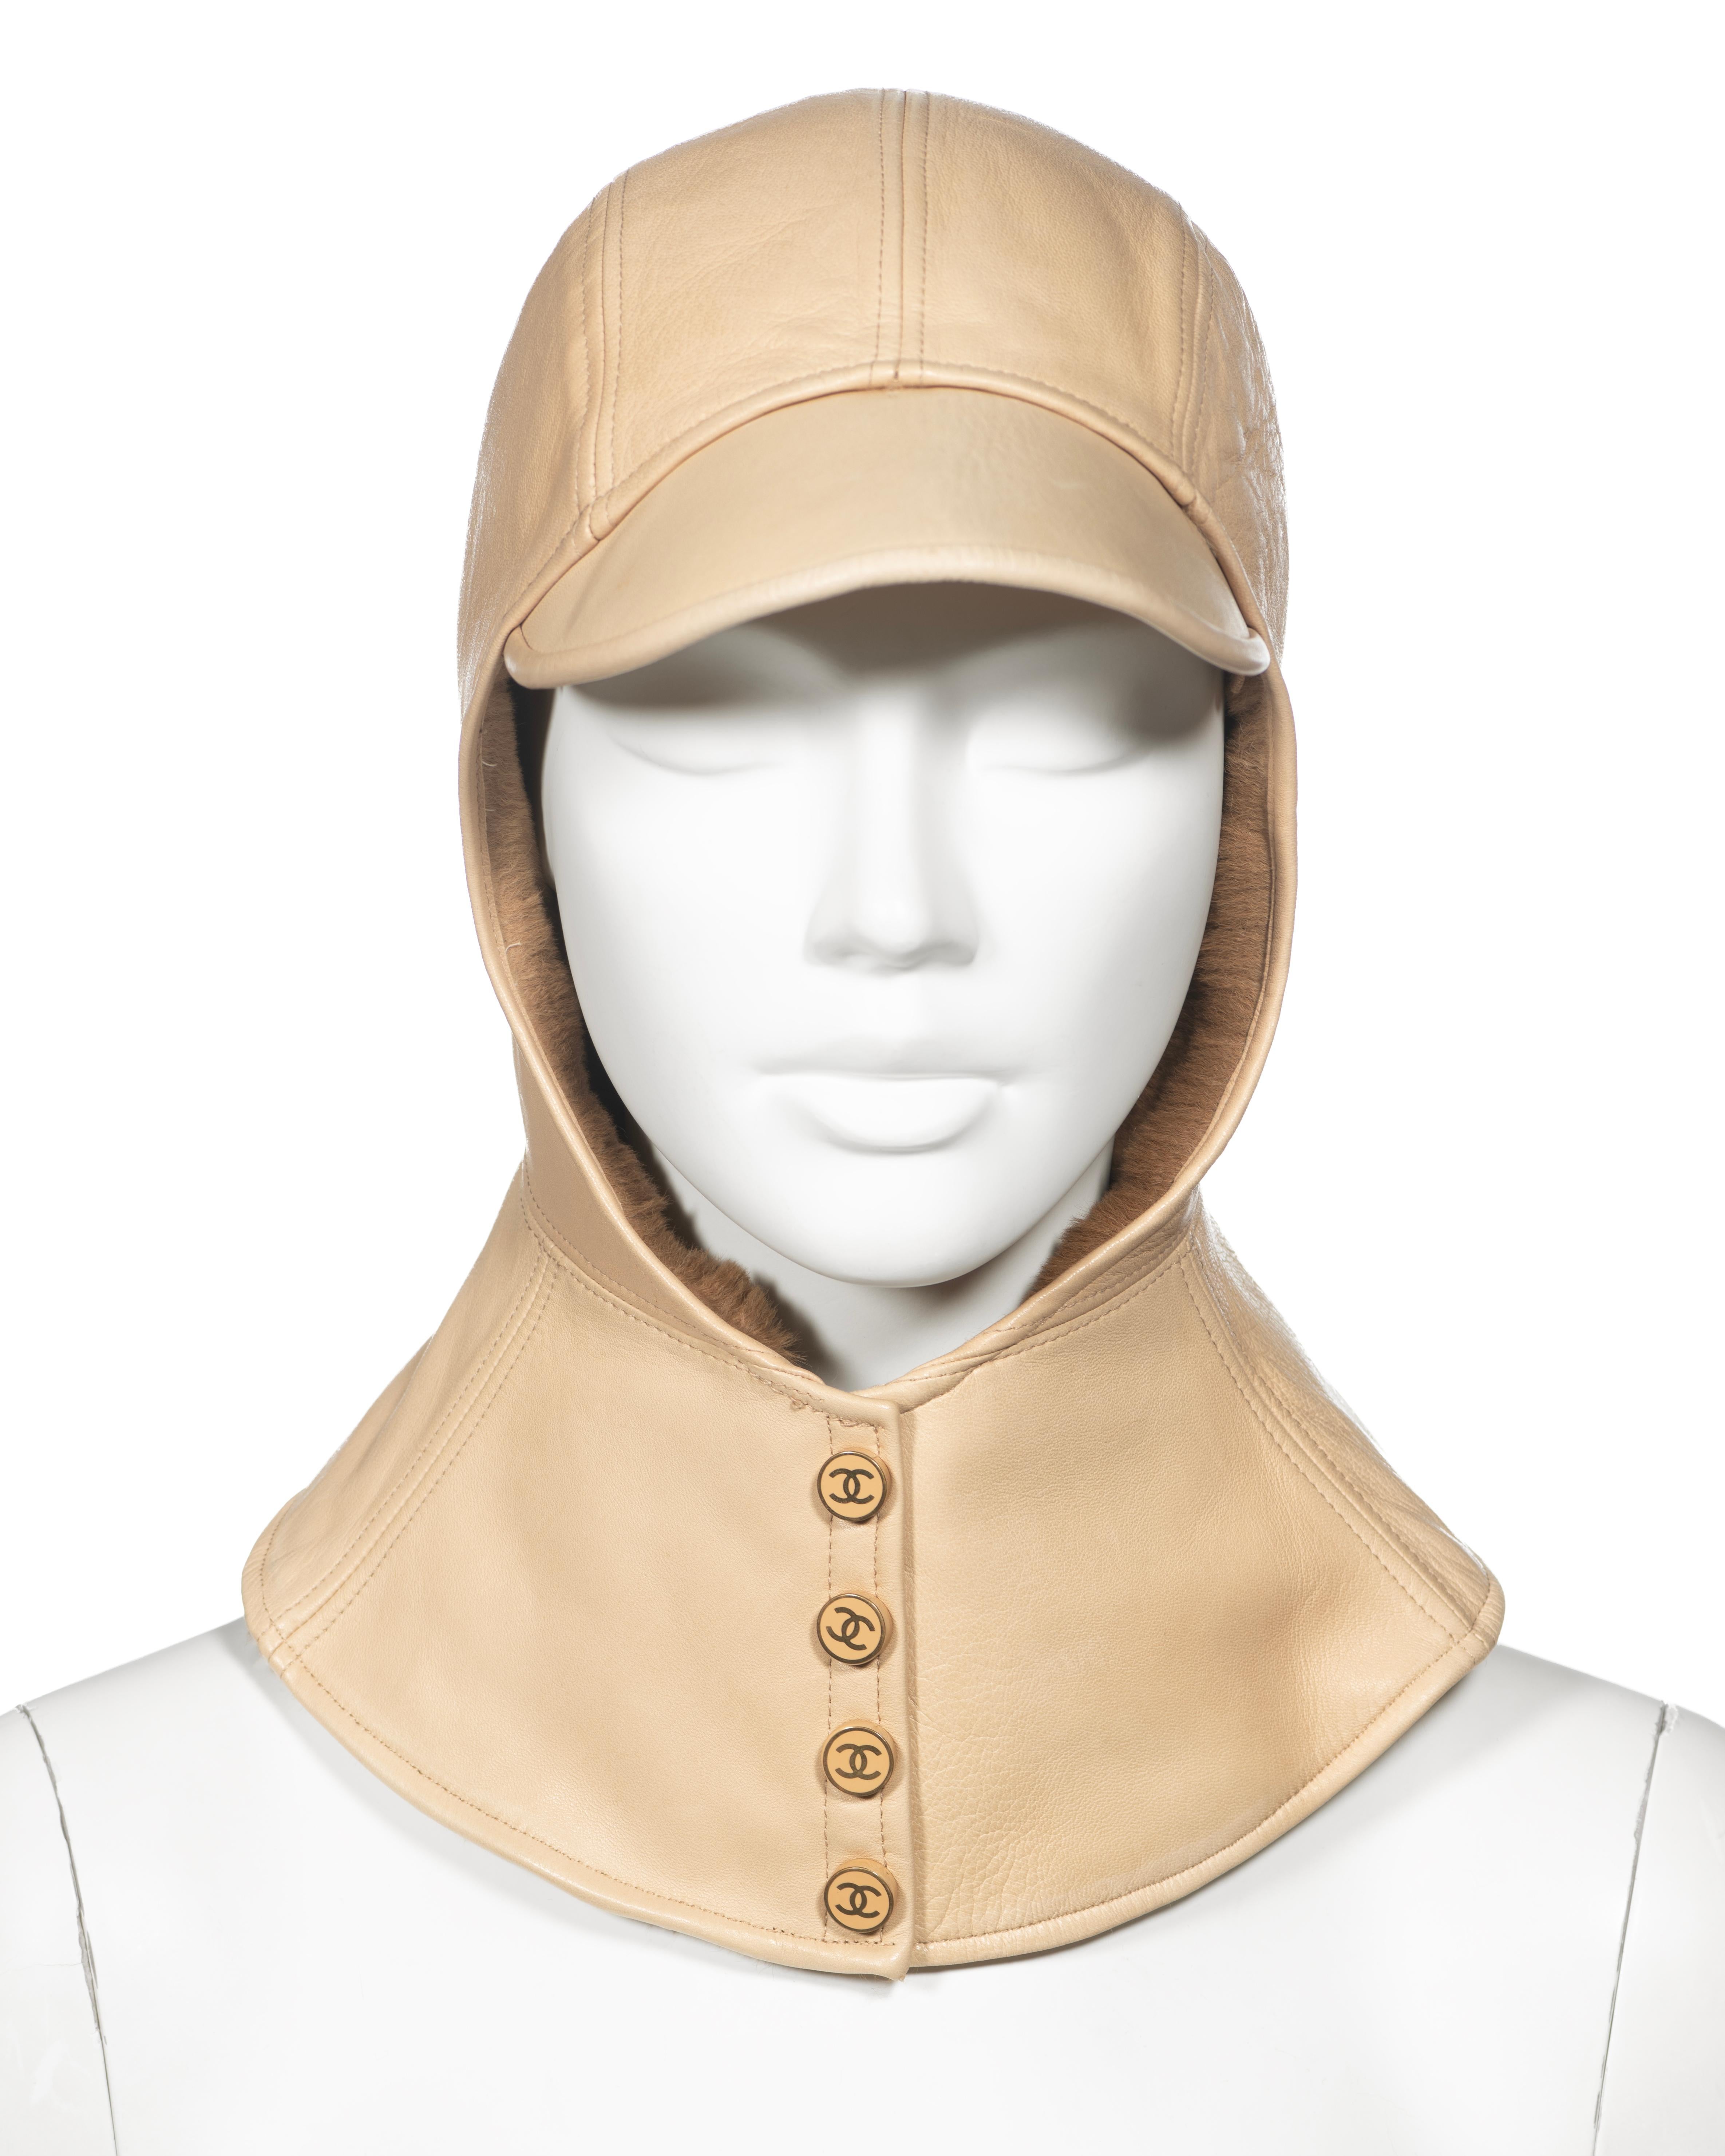 Beige Chanel by Karl Lagerfeld Fur-Lined Lambskin Leather Hat with Neck Flap, fw 2001